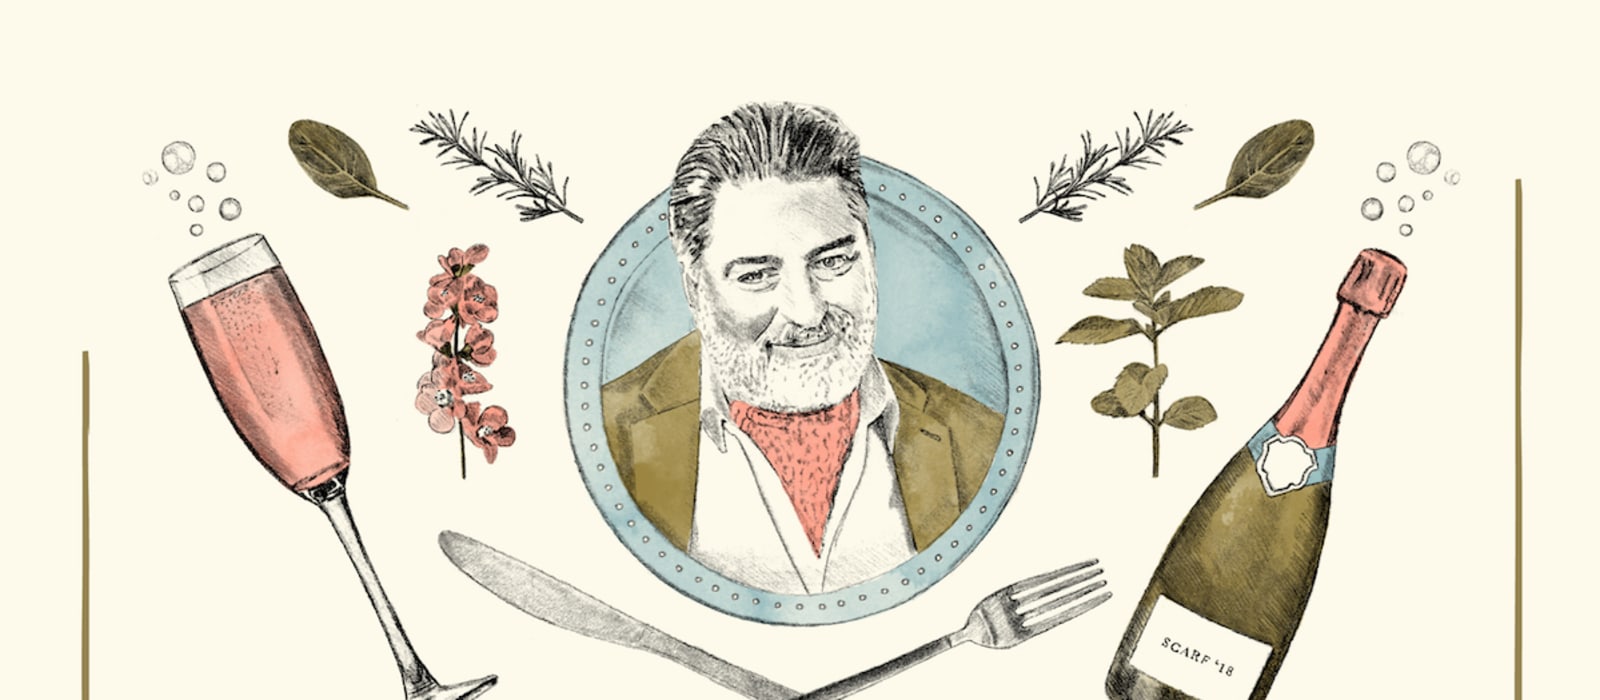 Join Matt Preston and Scarf for Do More Than Dine ’18